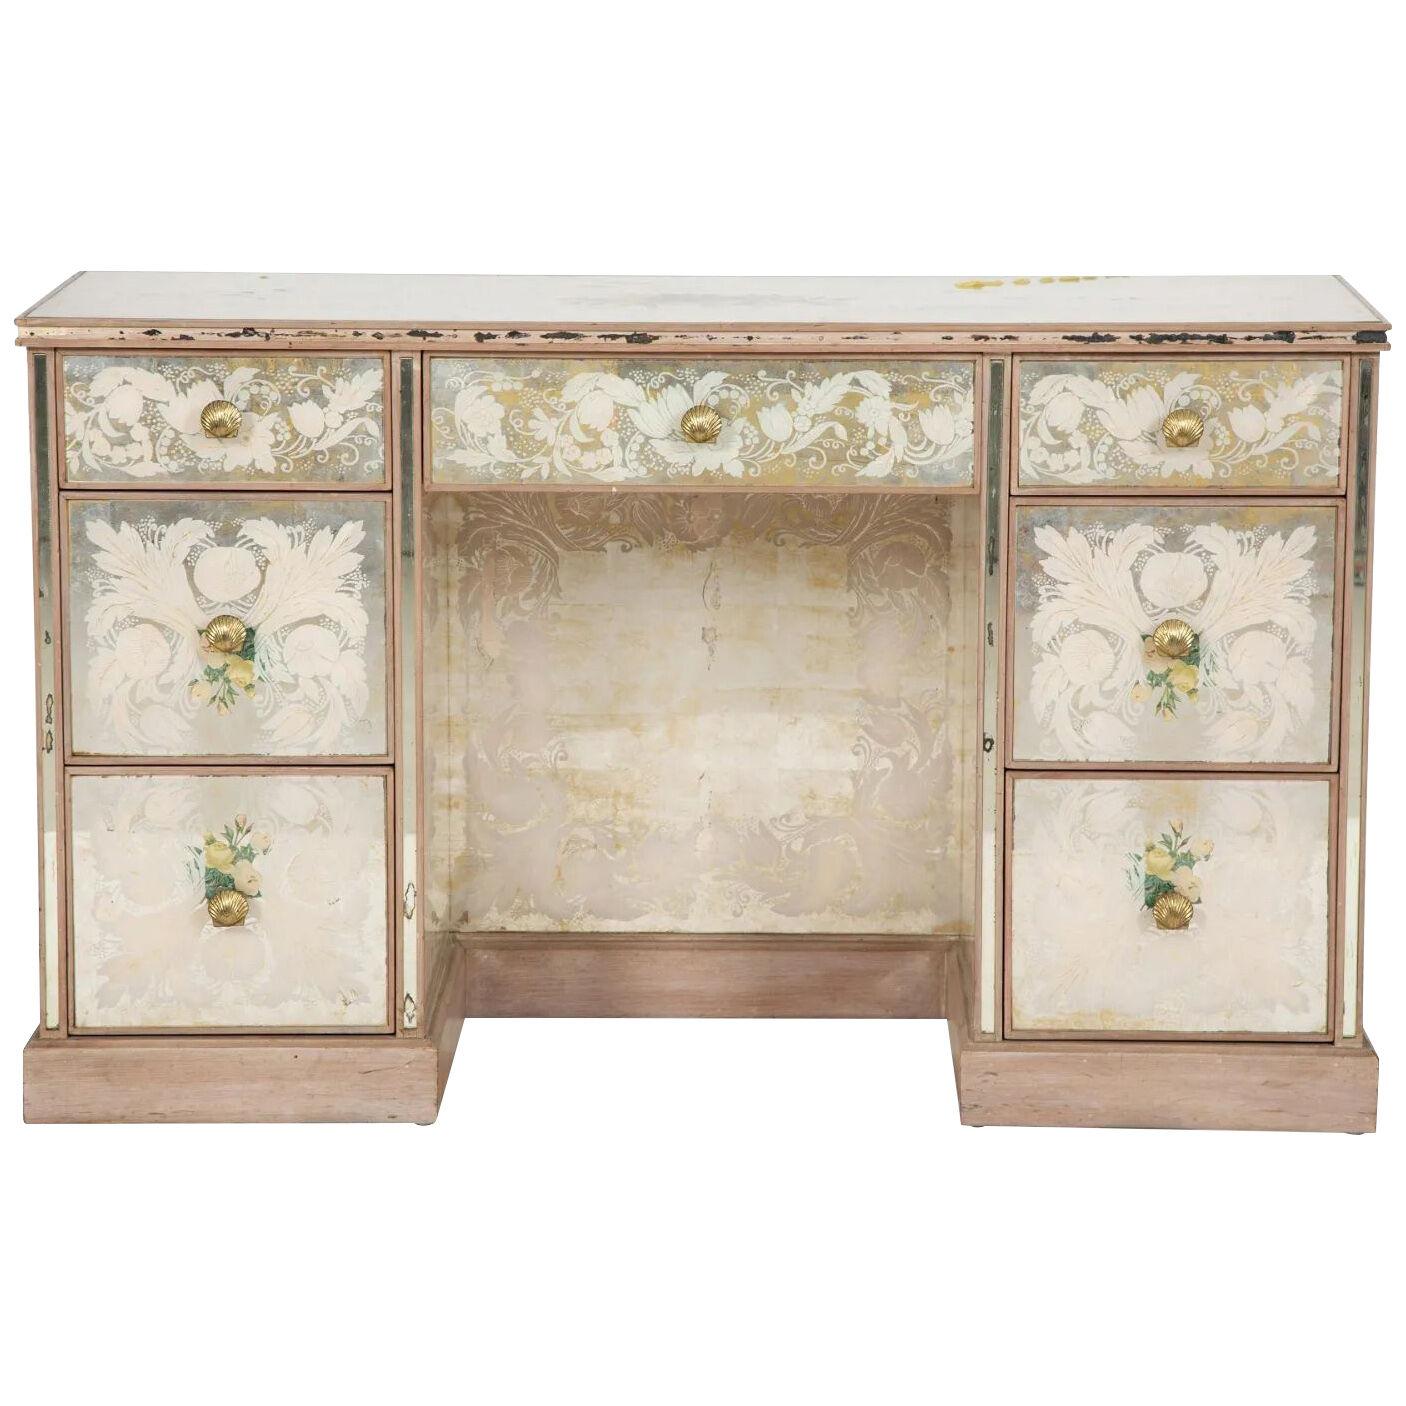 Hollywood Regency French Eglomise Mirrored Desk, Vanity or Writing Table